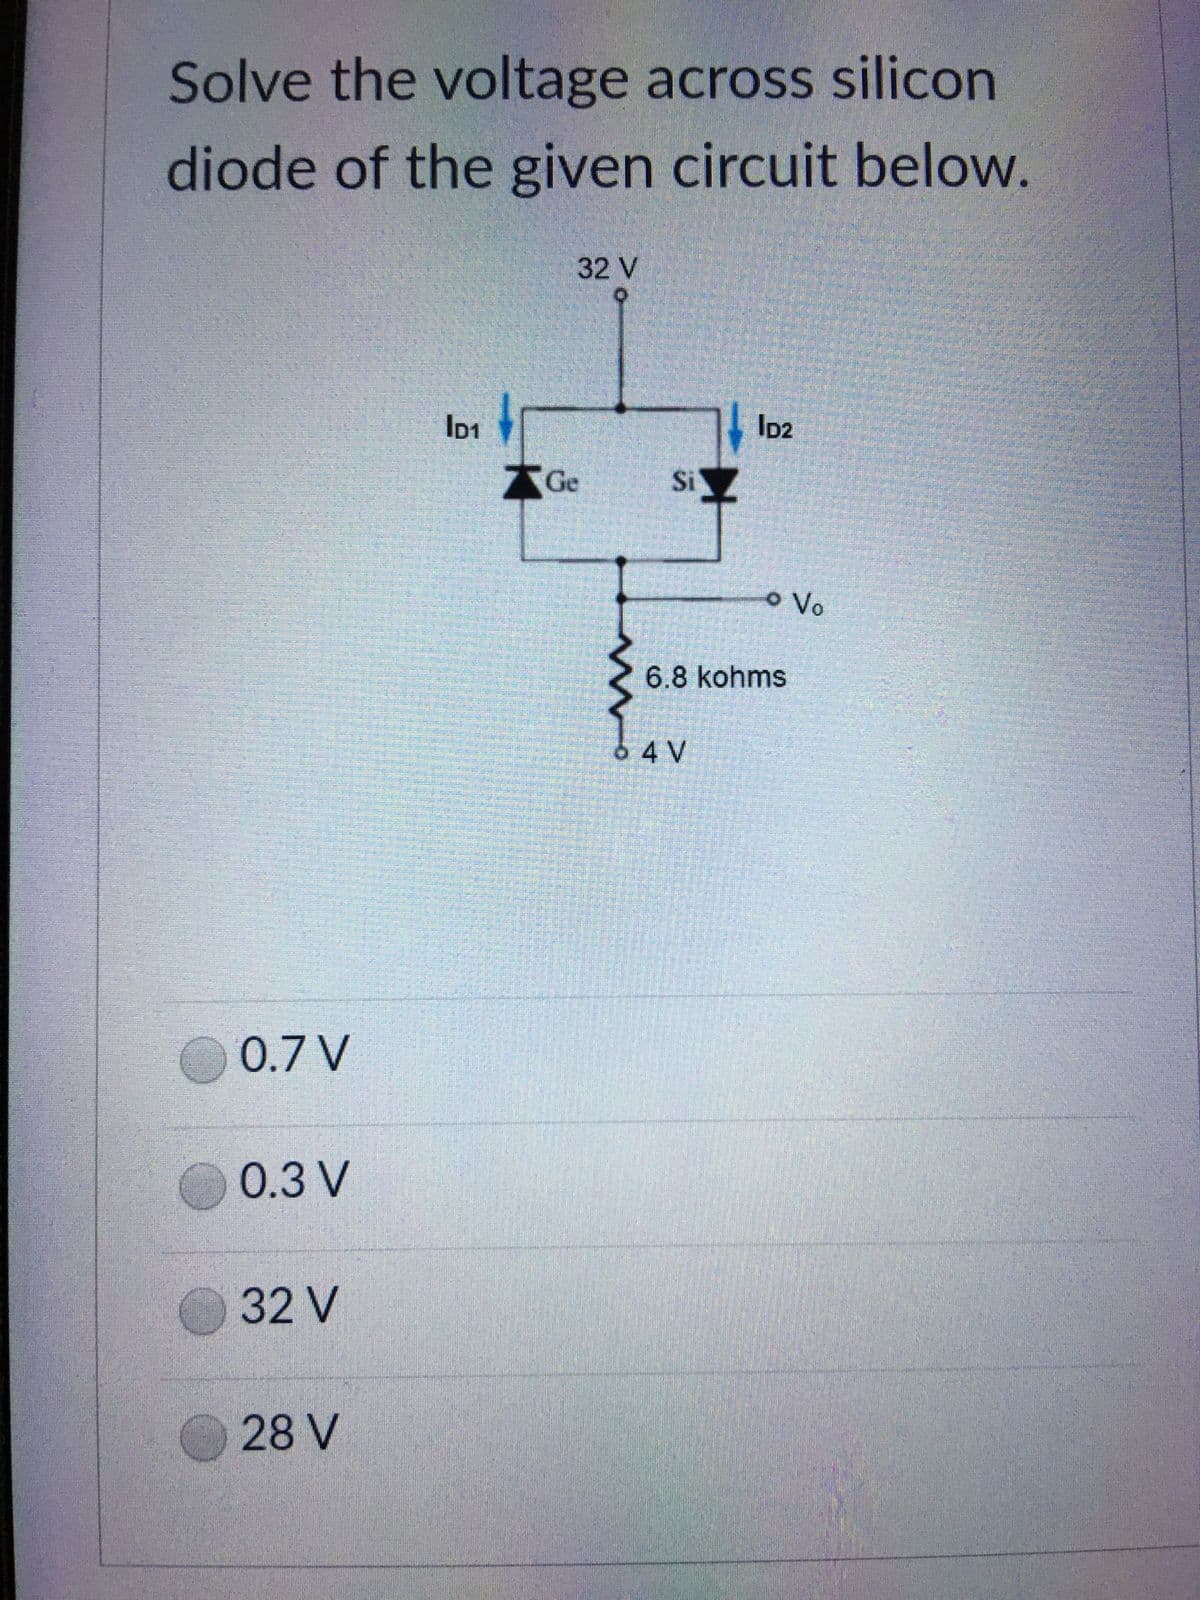 Solve the voltage across silicon
diode of the given circuit below.
32 V
ID2
ID1
0.7 V
0.3 V
32 V
28 V
Ge
m
siz
• Vo
6.8 kohms
6 4 V